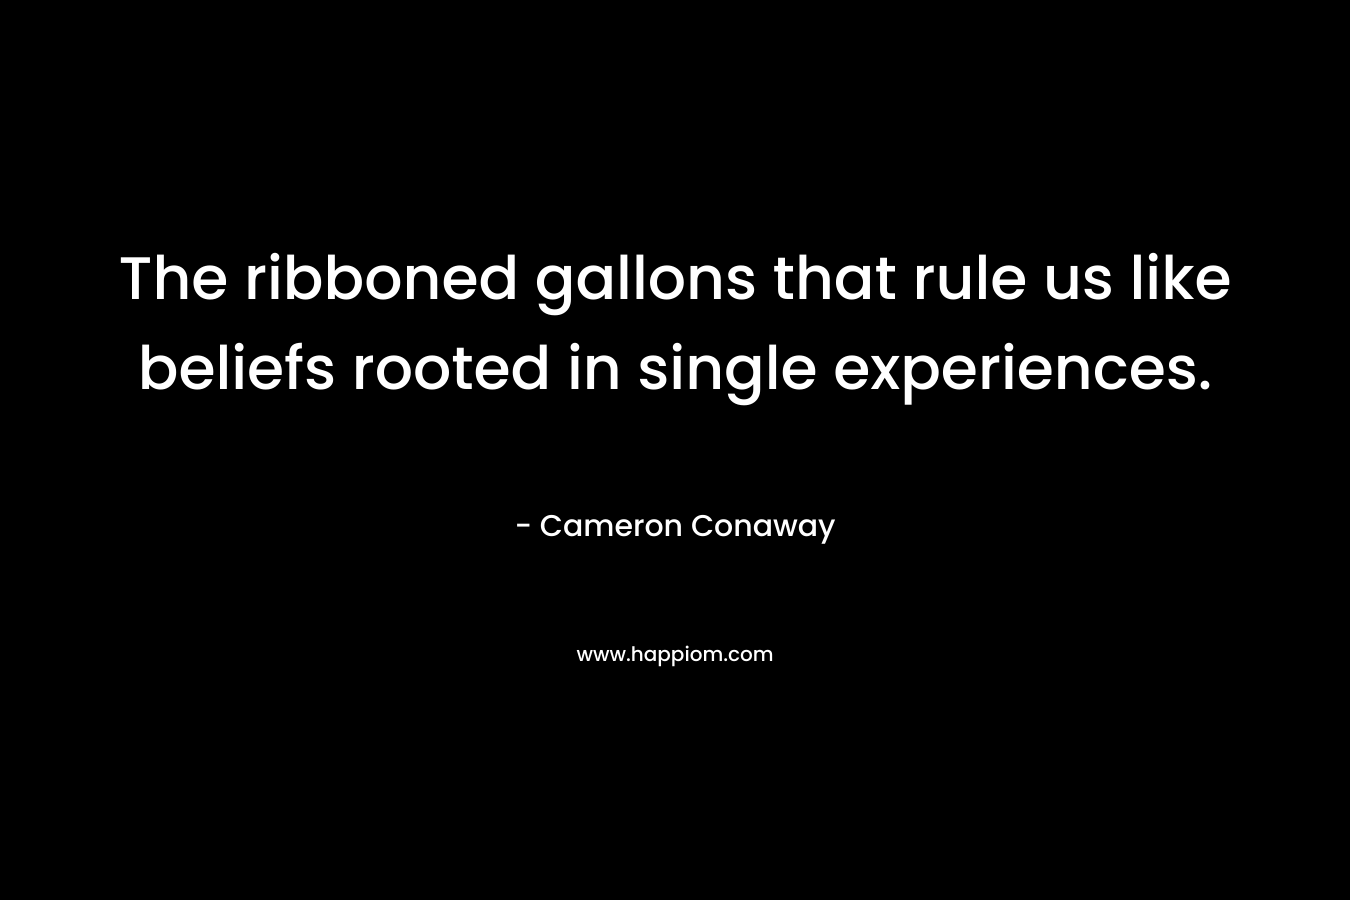 The ribboned gallons that rule us like beliefs rooted in single experiences.